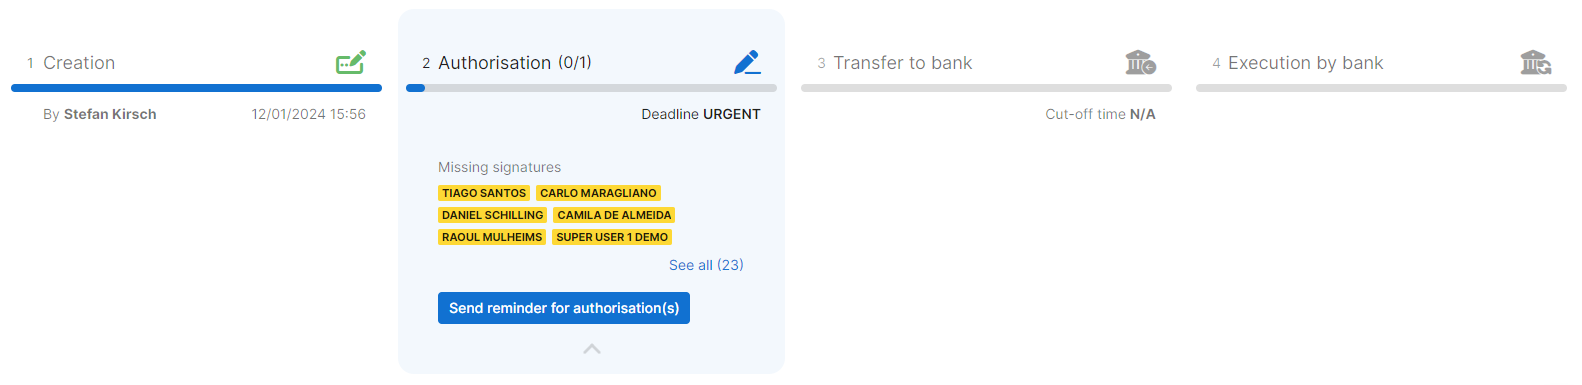 Credit transfer - detail - timeline - required signatures